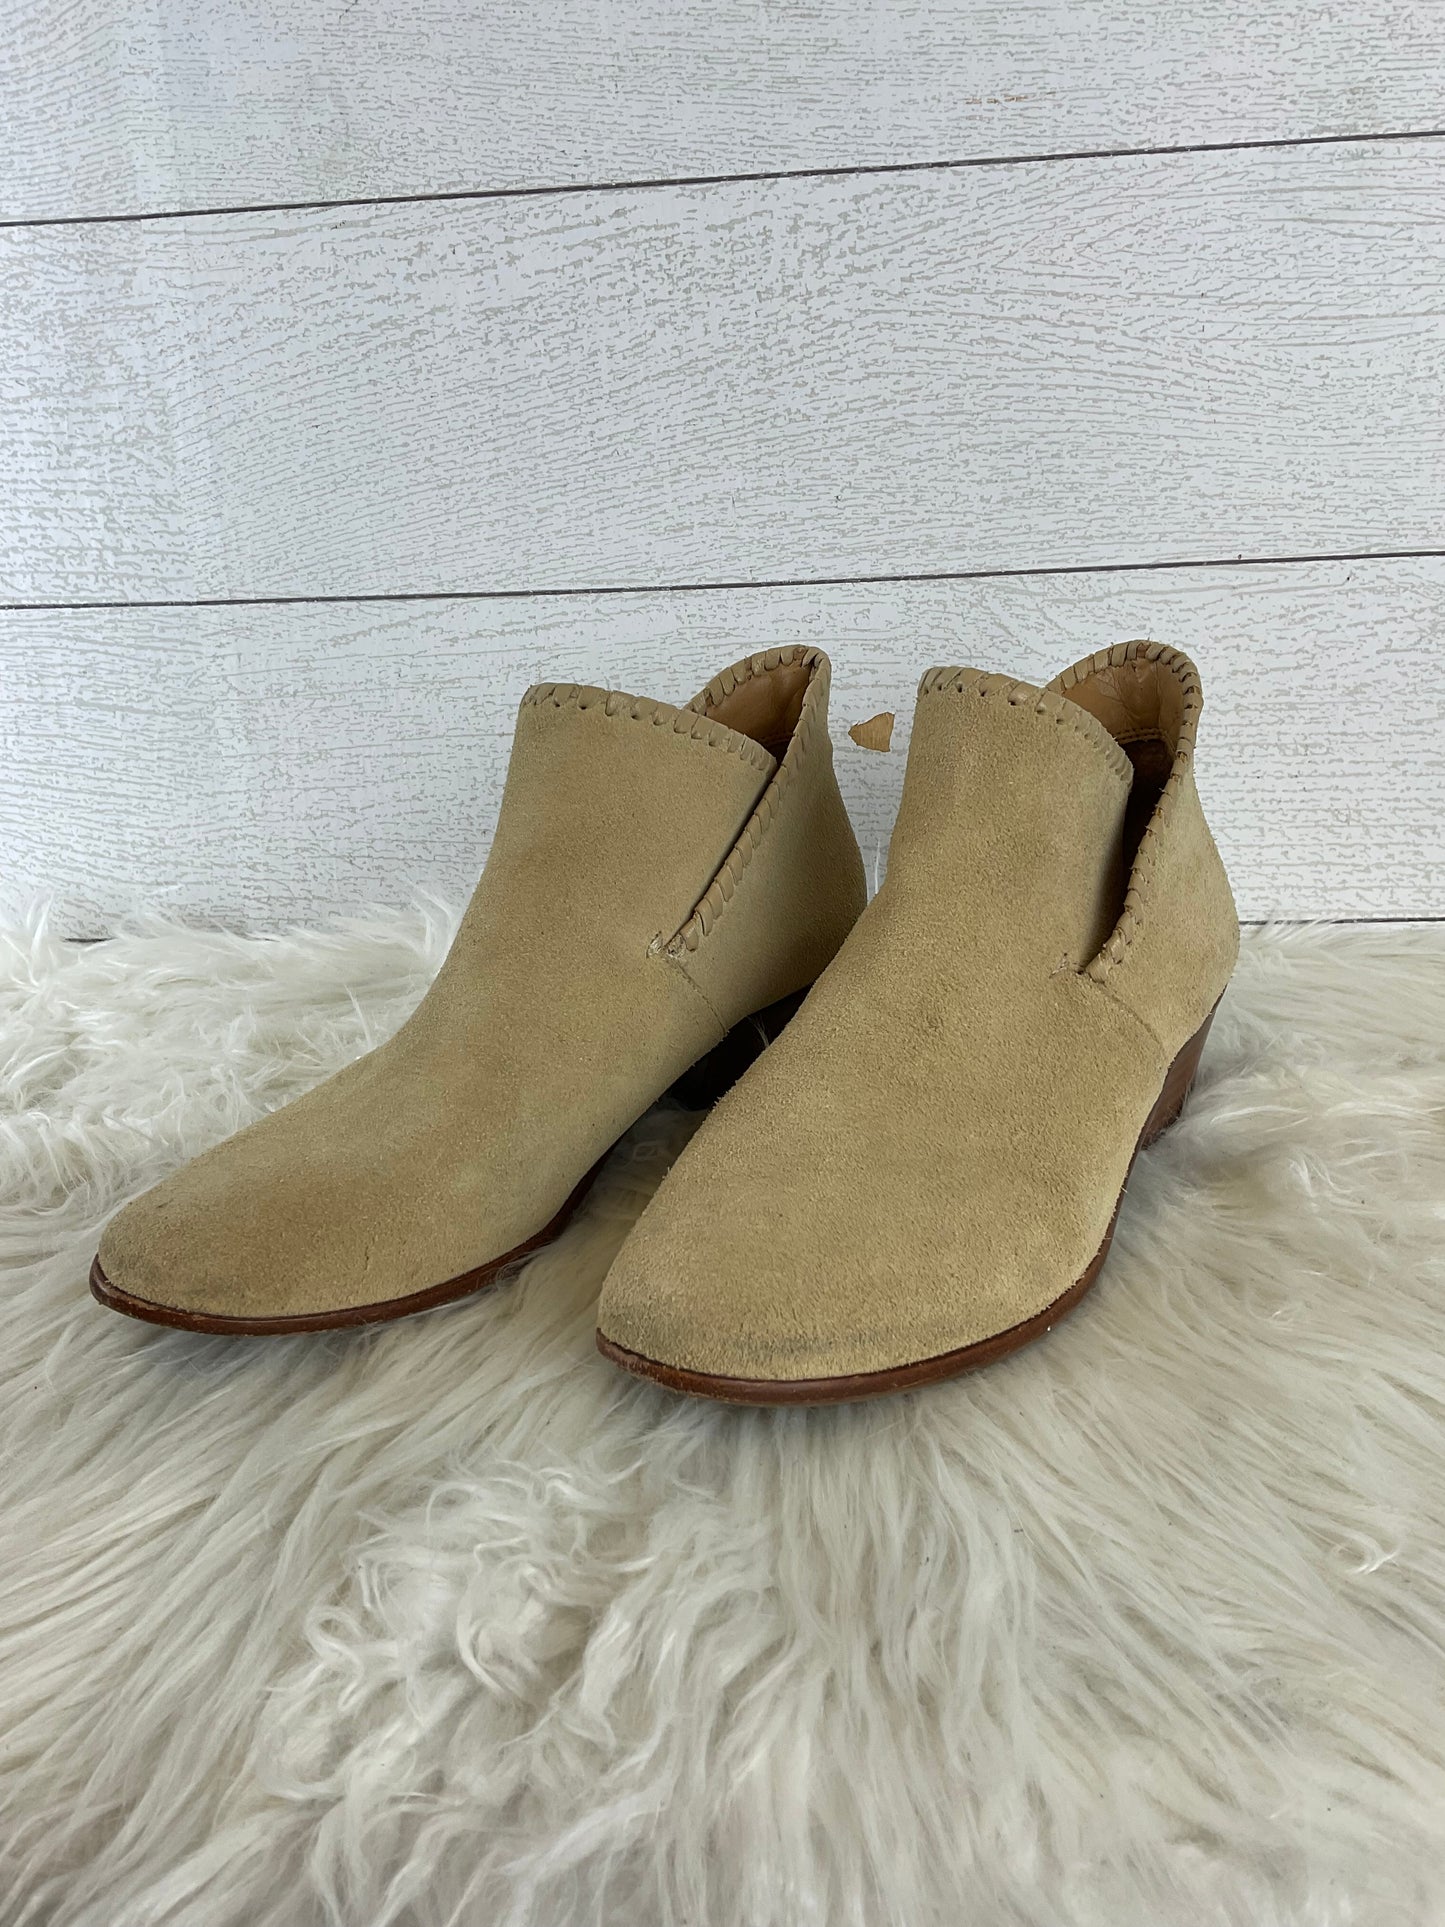 Boots Ankle Heels By Jack Rogers  Size: 8